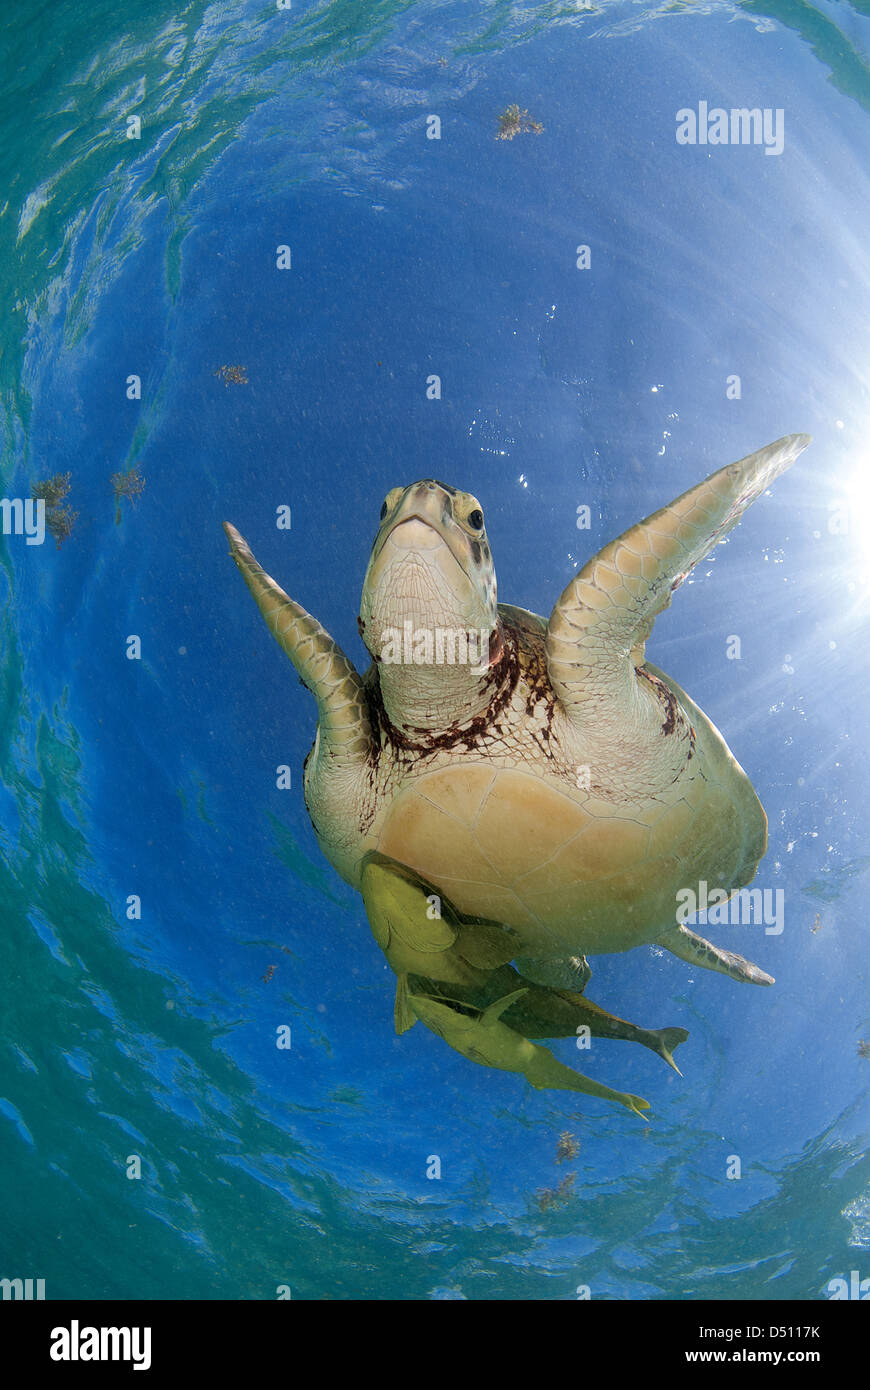 https://c8.alamy.com/comp/D5117K/green-sea-turtle-chelonia-mydas-taking-a-breath-on-the-surface-in-D5117K.jpg